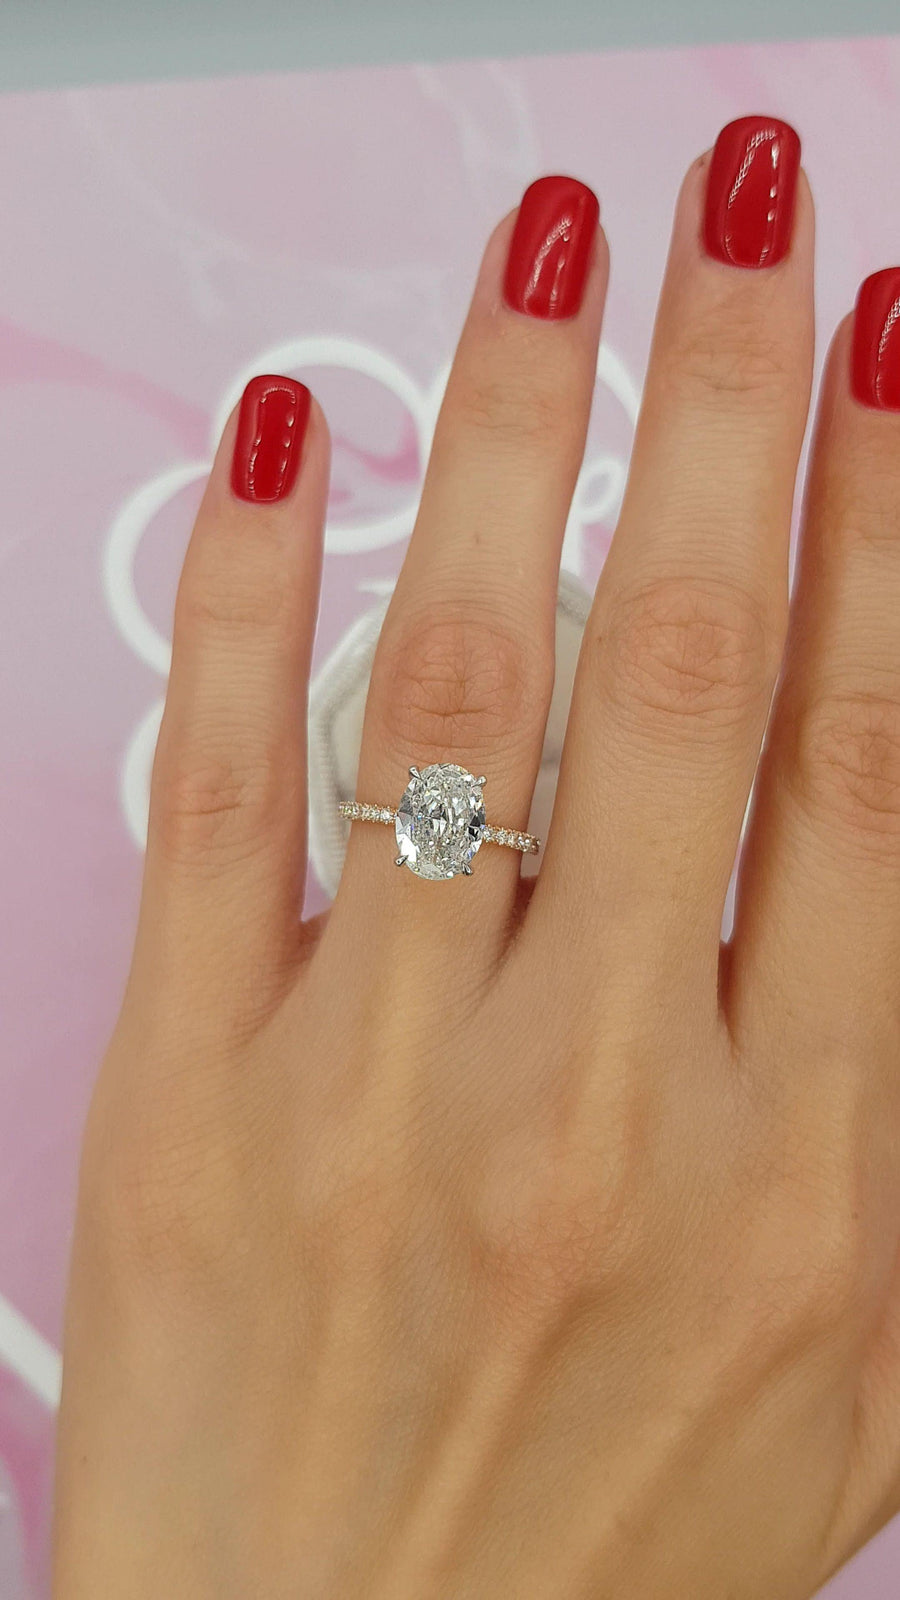 2 Carat Oval Halo Engagement Ring | Barkev's